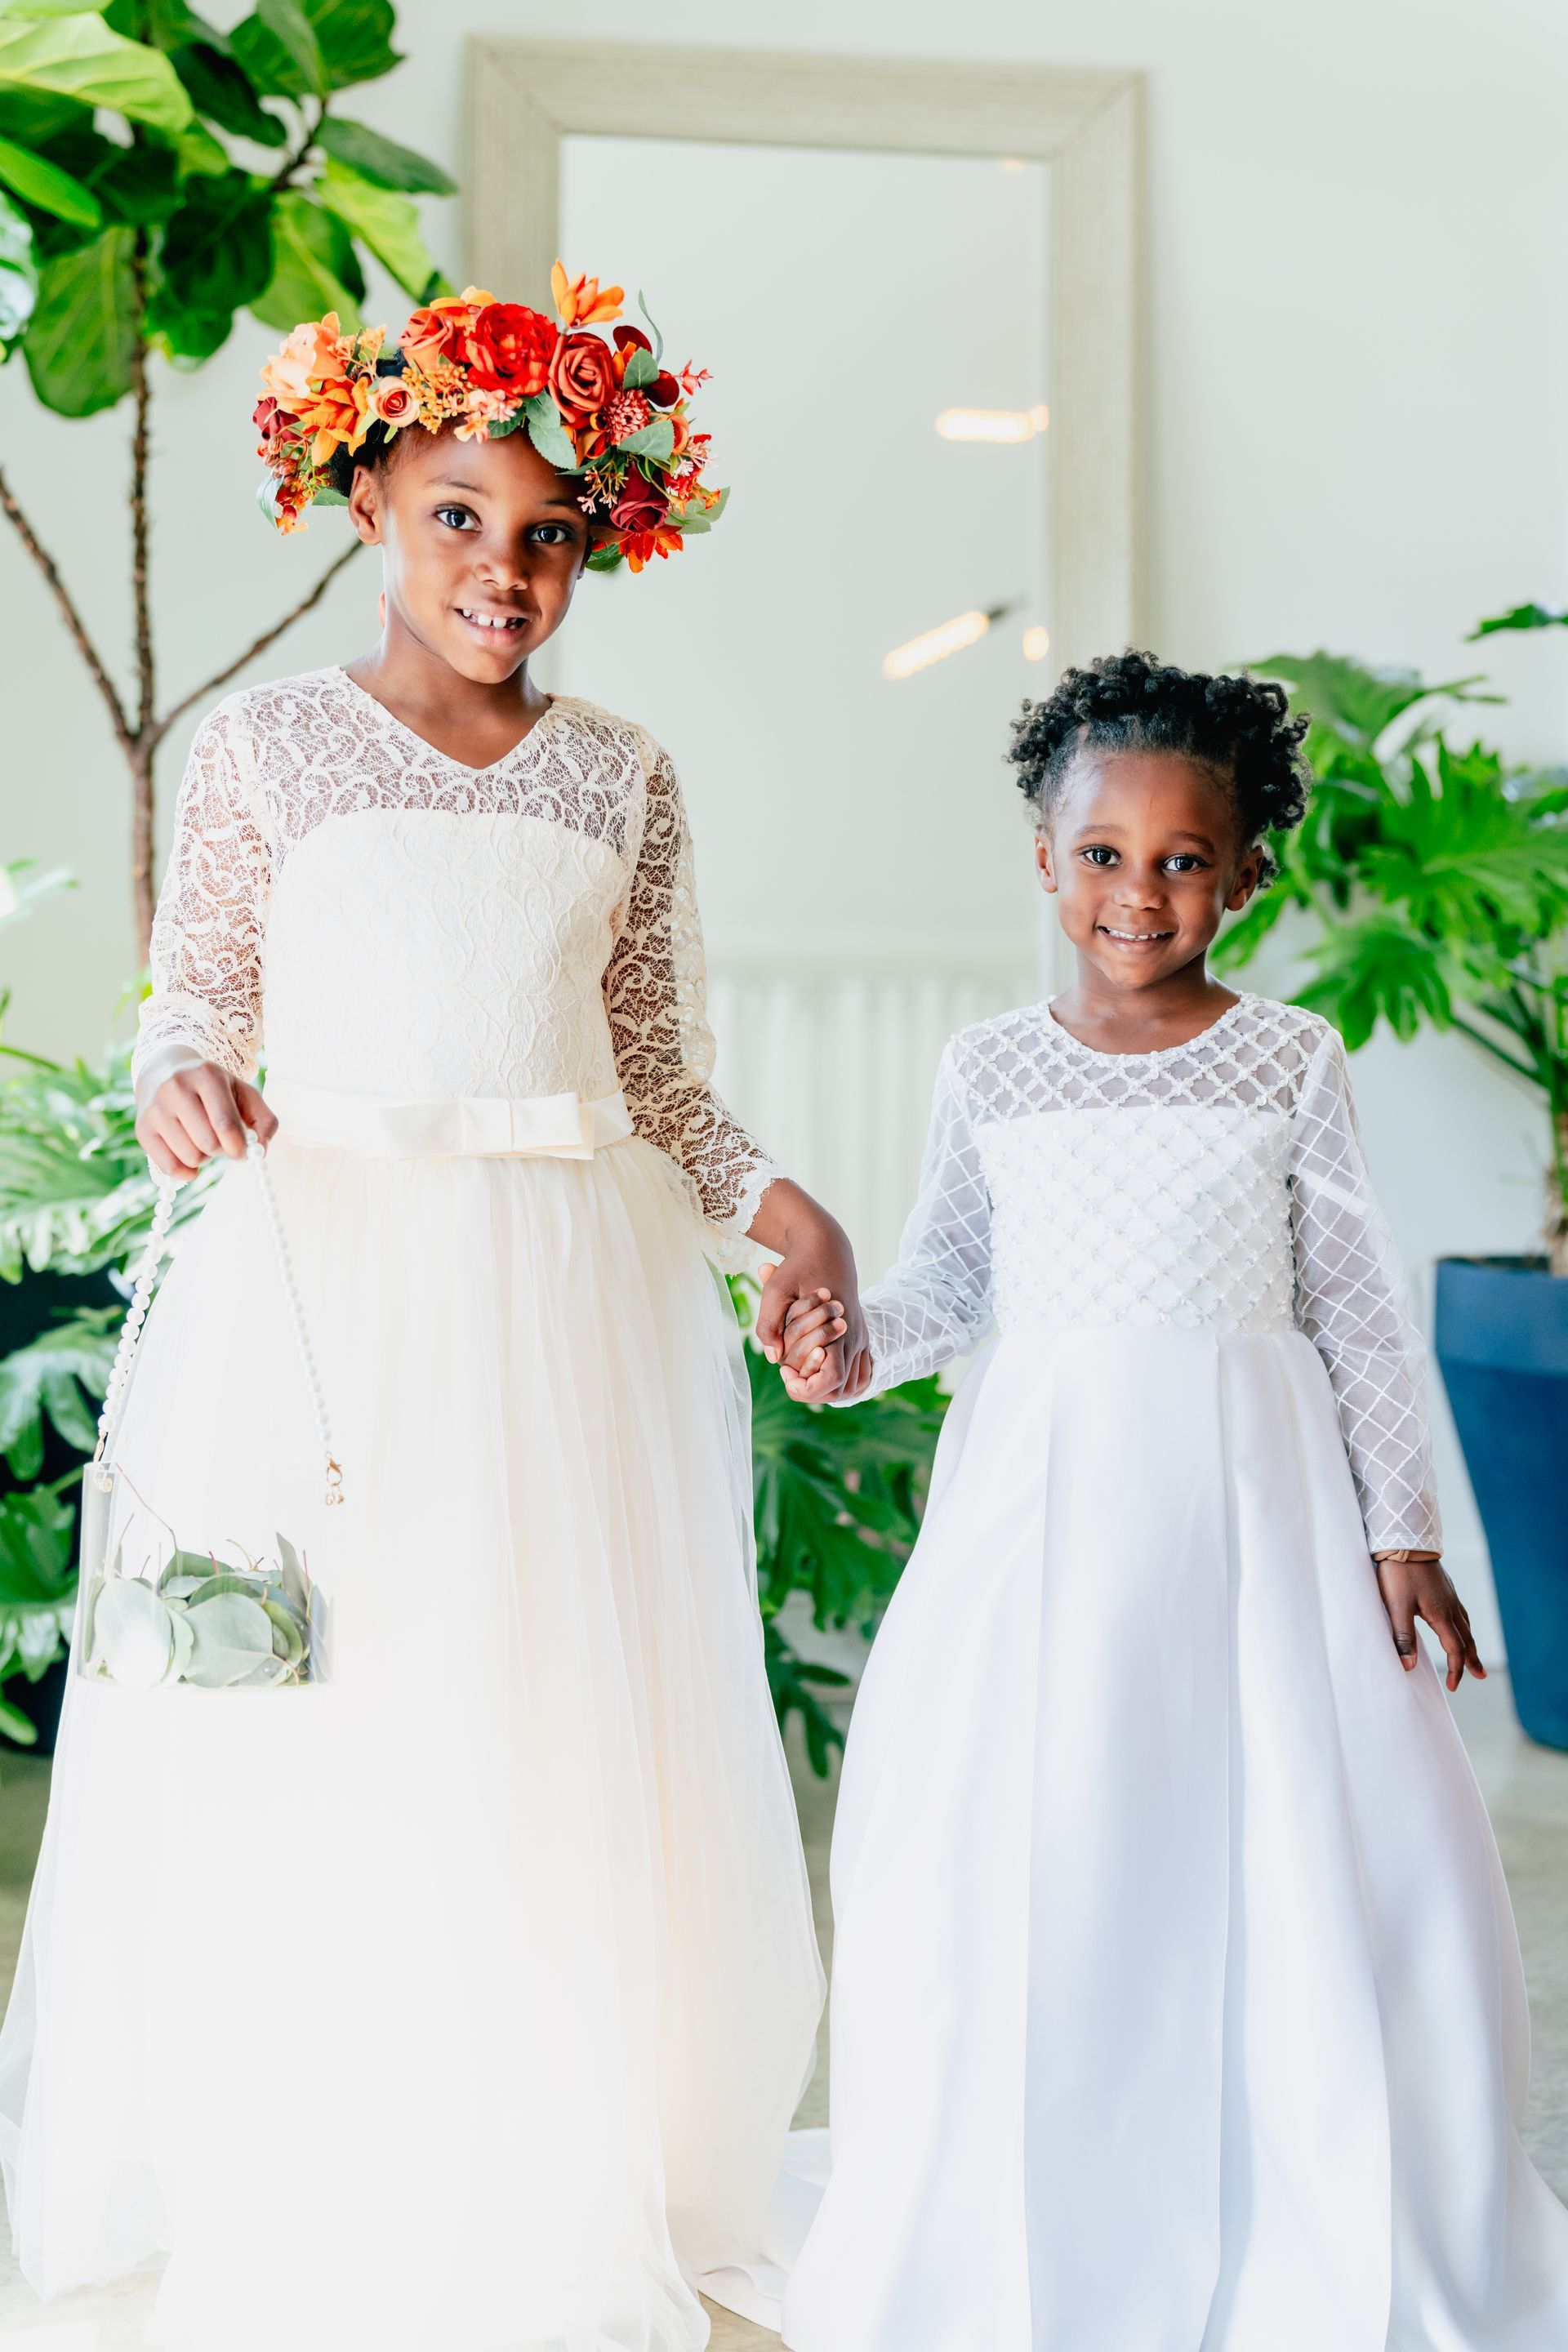 Two flower girls are holding hands and wearing white dresses.